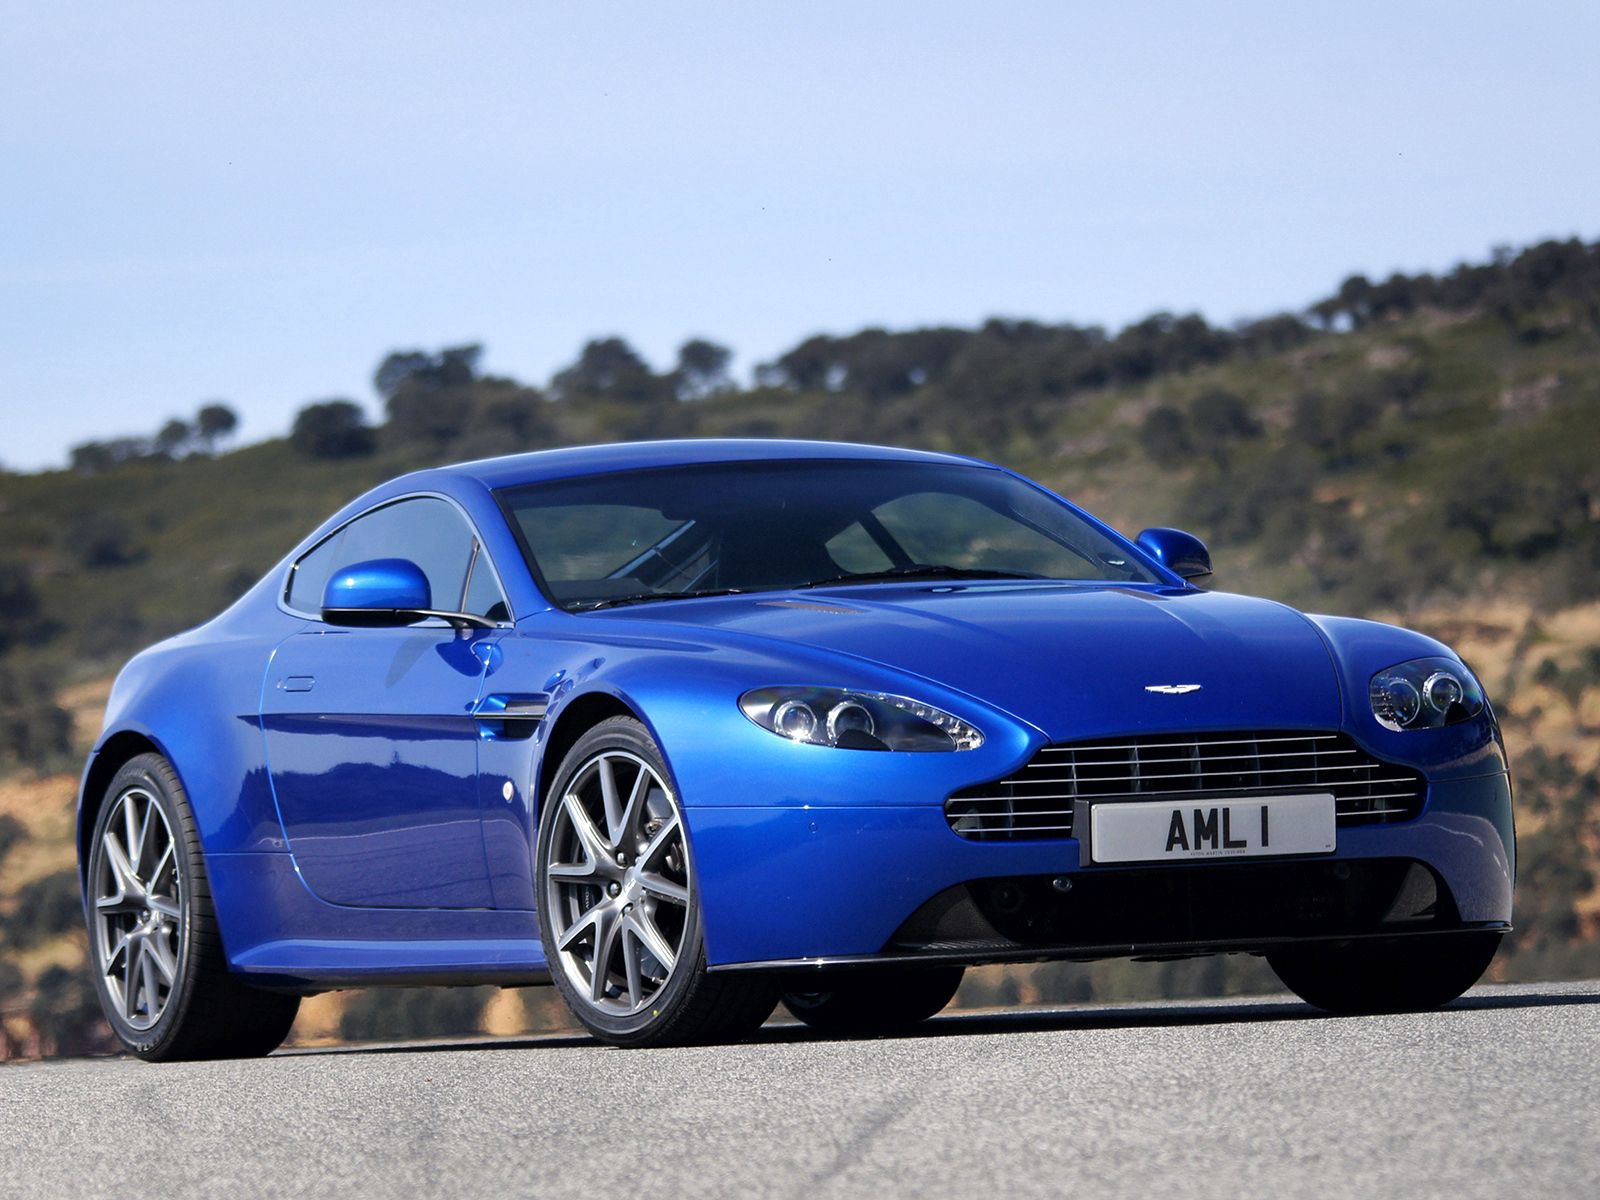 v8, front view, cars, nature, aston martin, blue, style, 2011, vantage